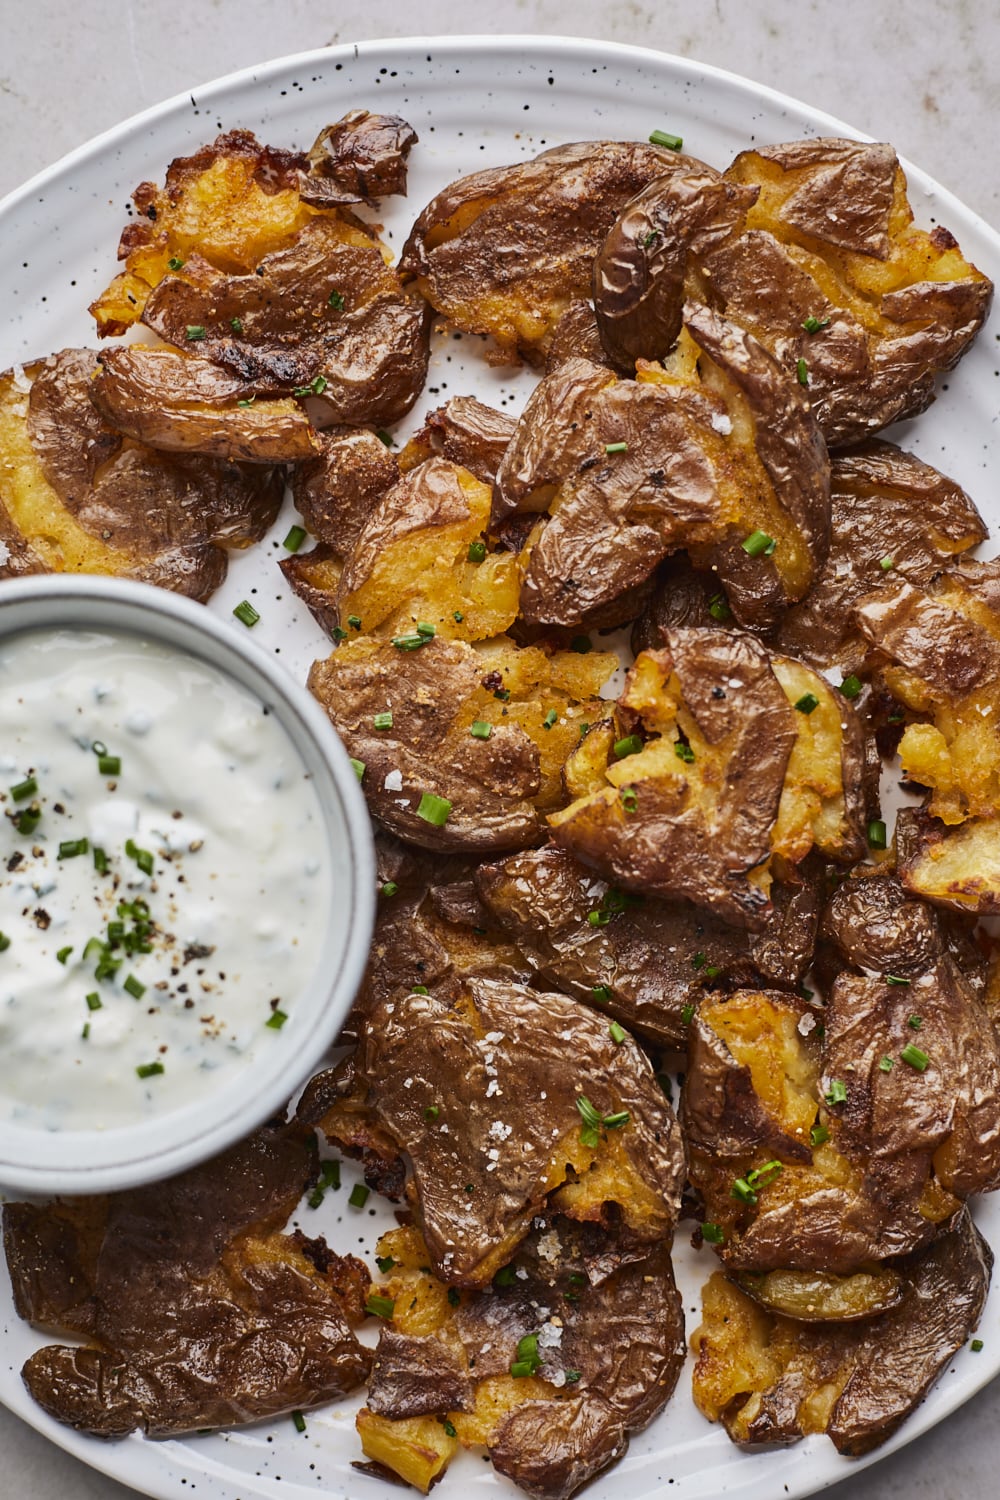 Crispy Smashed Potatoes With Sour Cream and Chive Dip